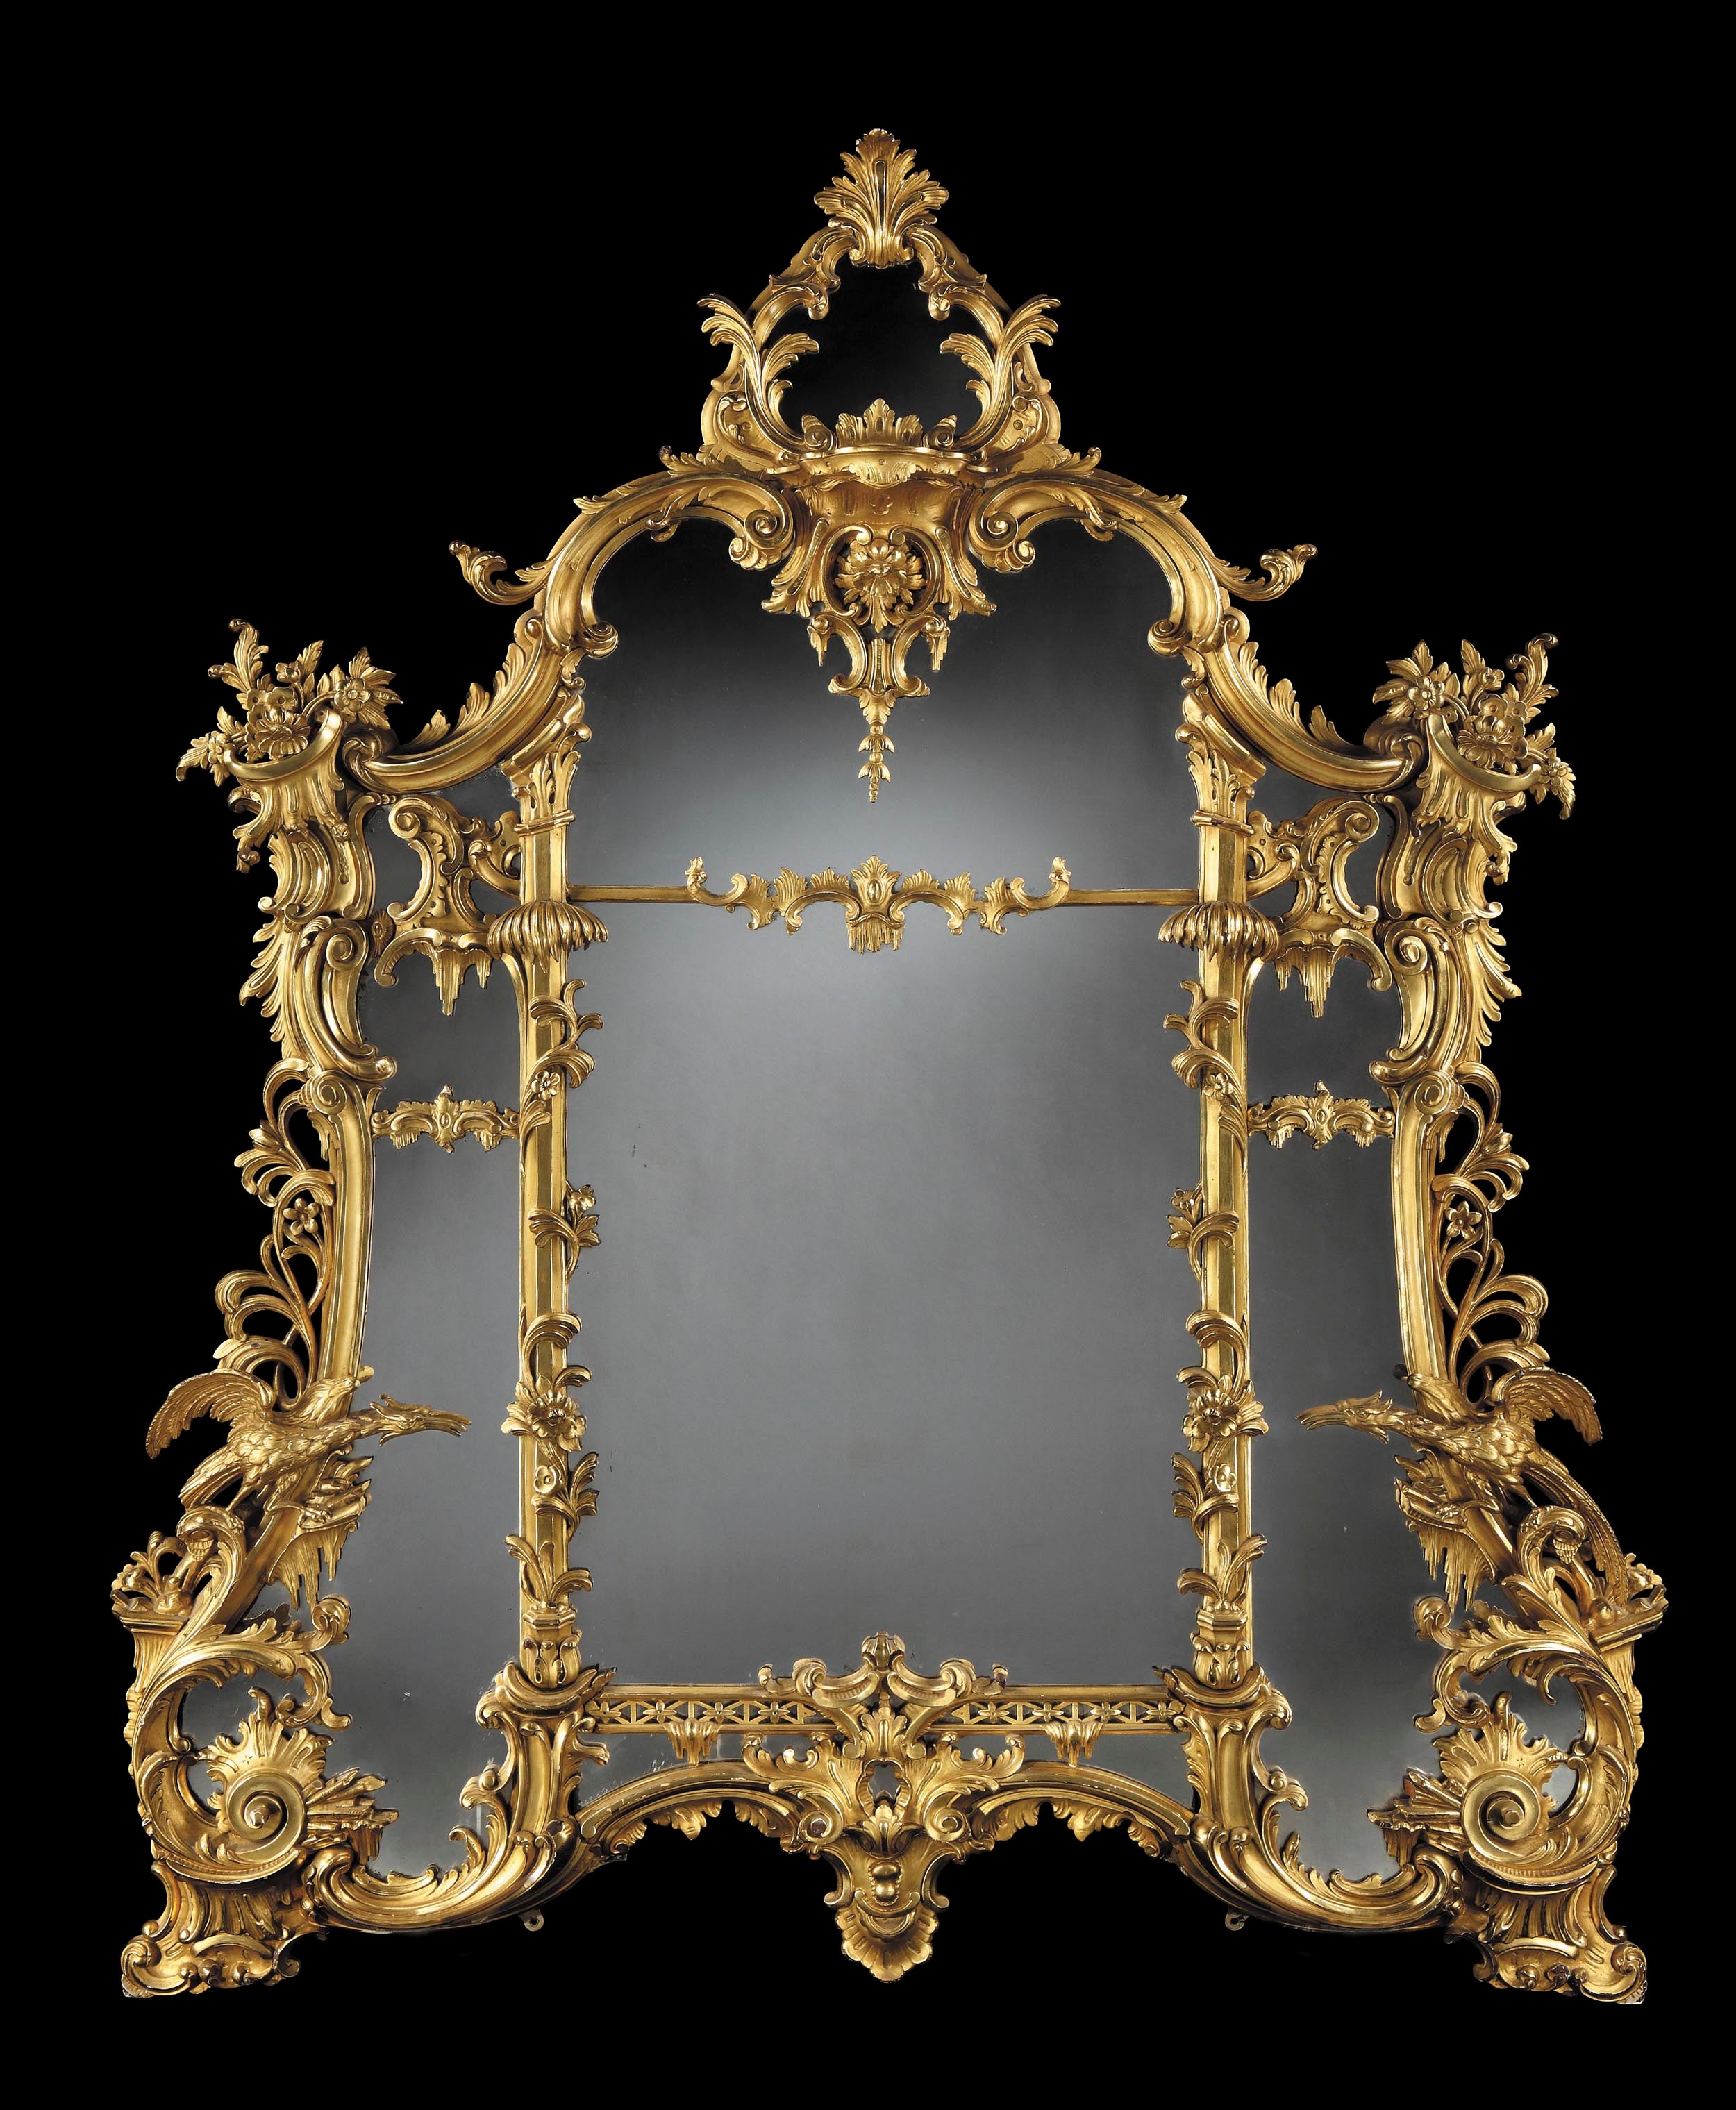 An Antique Giltwood Mirror of Substantial size in the Rococo Chippendale Manner